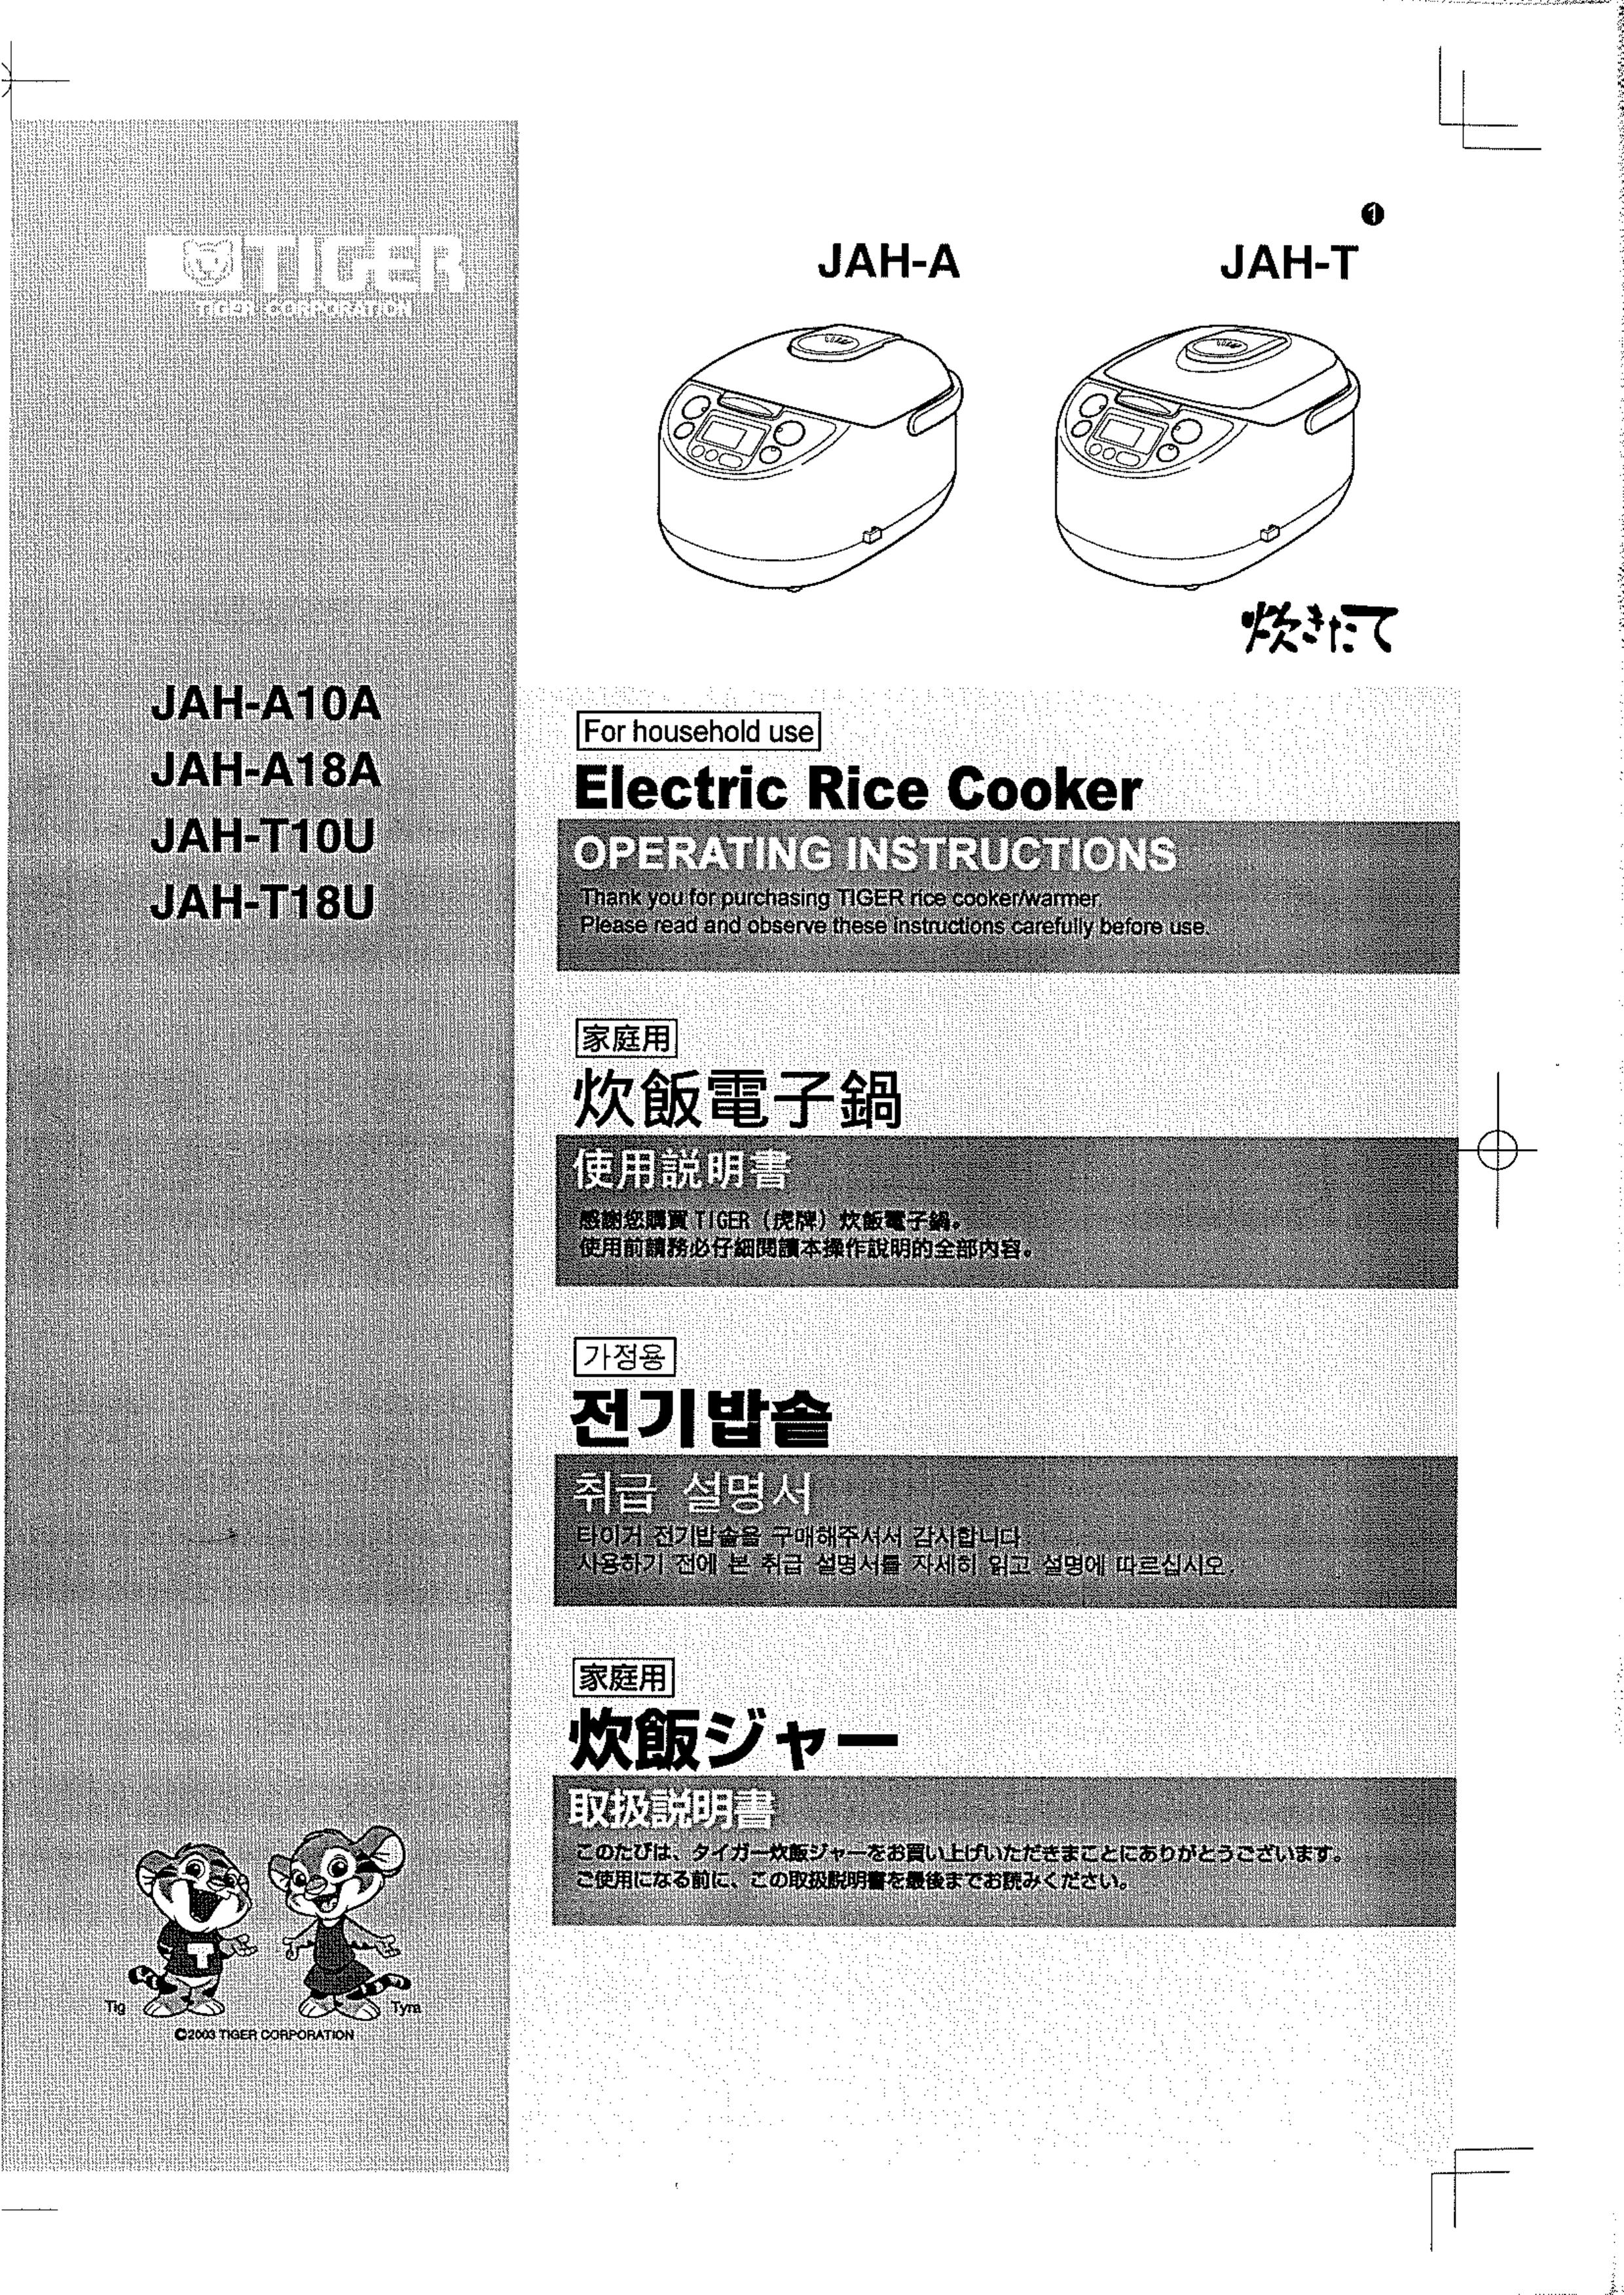 Tiger Products Co., Ltd JAH-A10A Rice Cooker User Manual